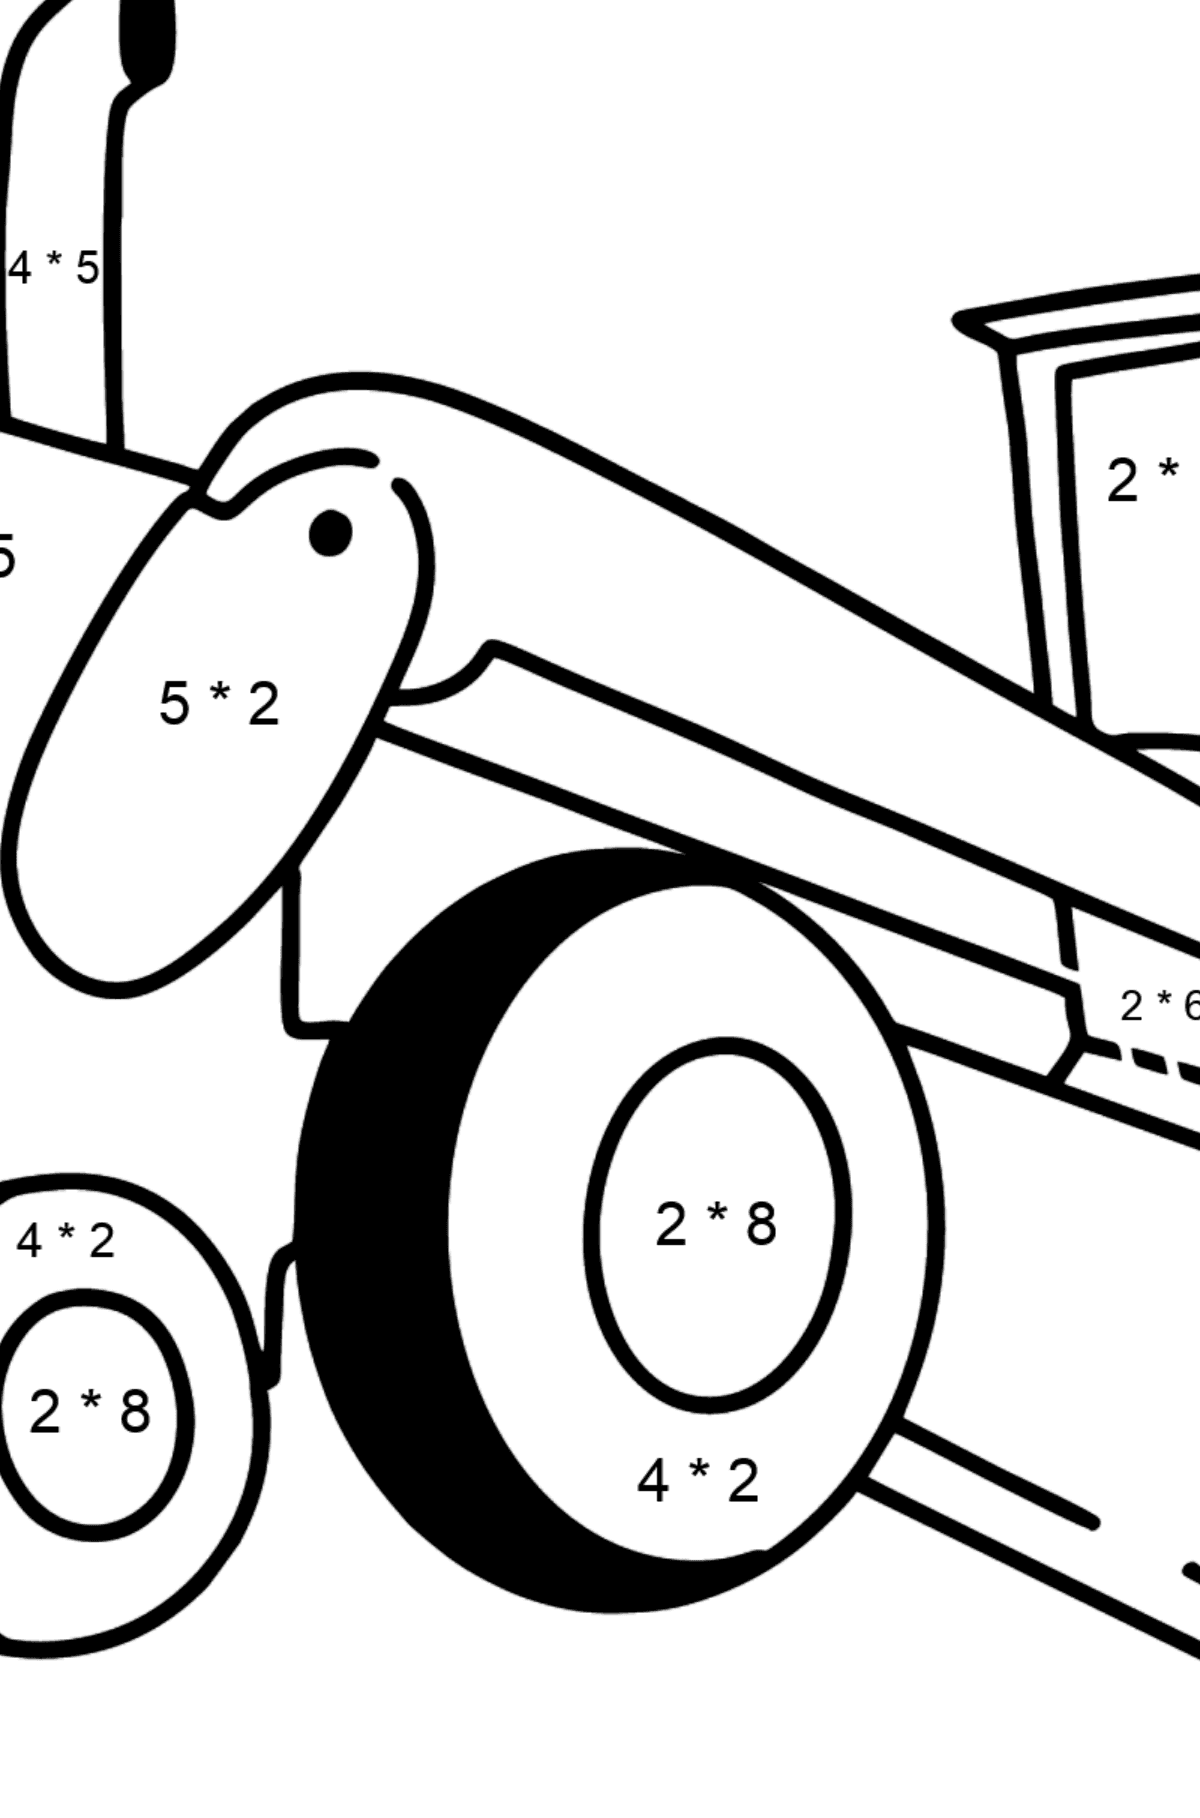 Tractor Grader coloring page - Math Coloring - Multiplication for Kids